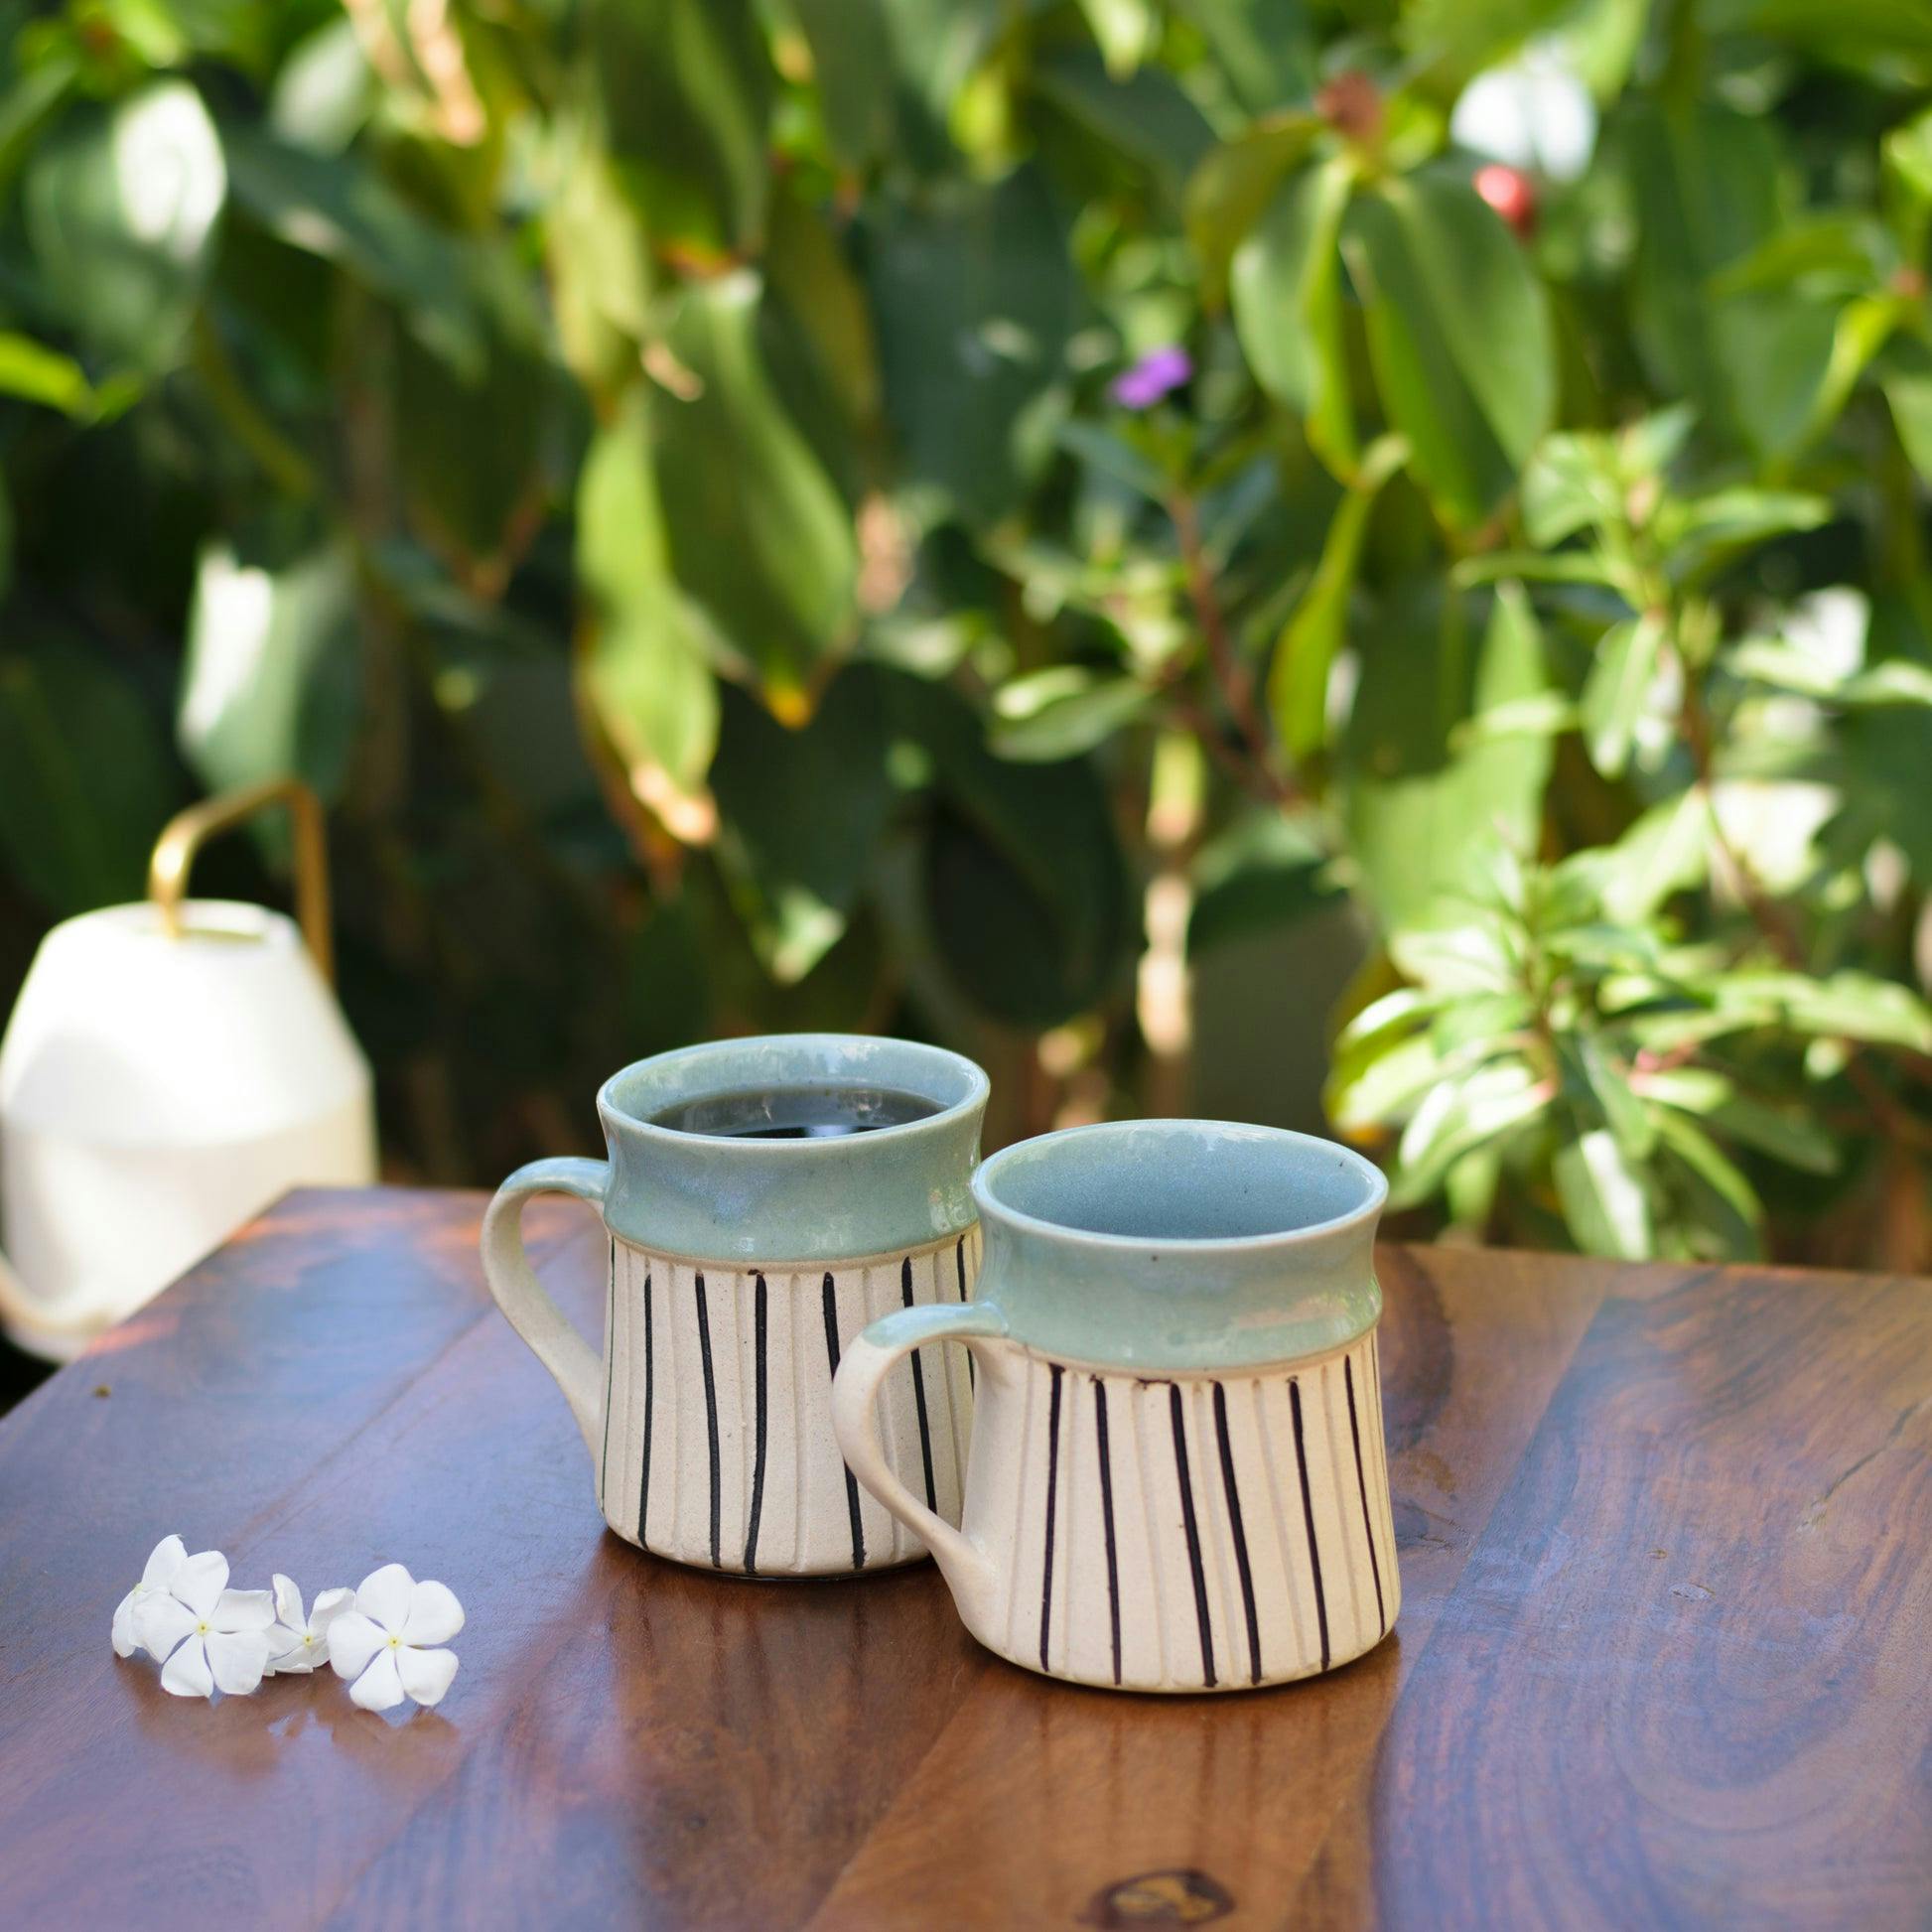 Lola Mugs Blue - Set of 2, a product by Oh Yay project